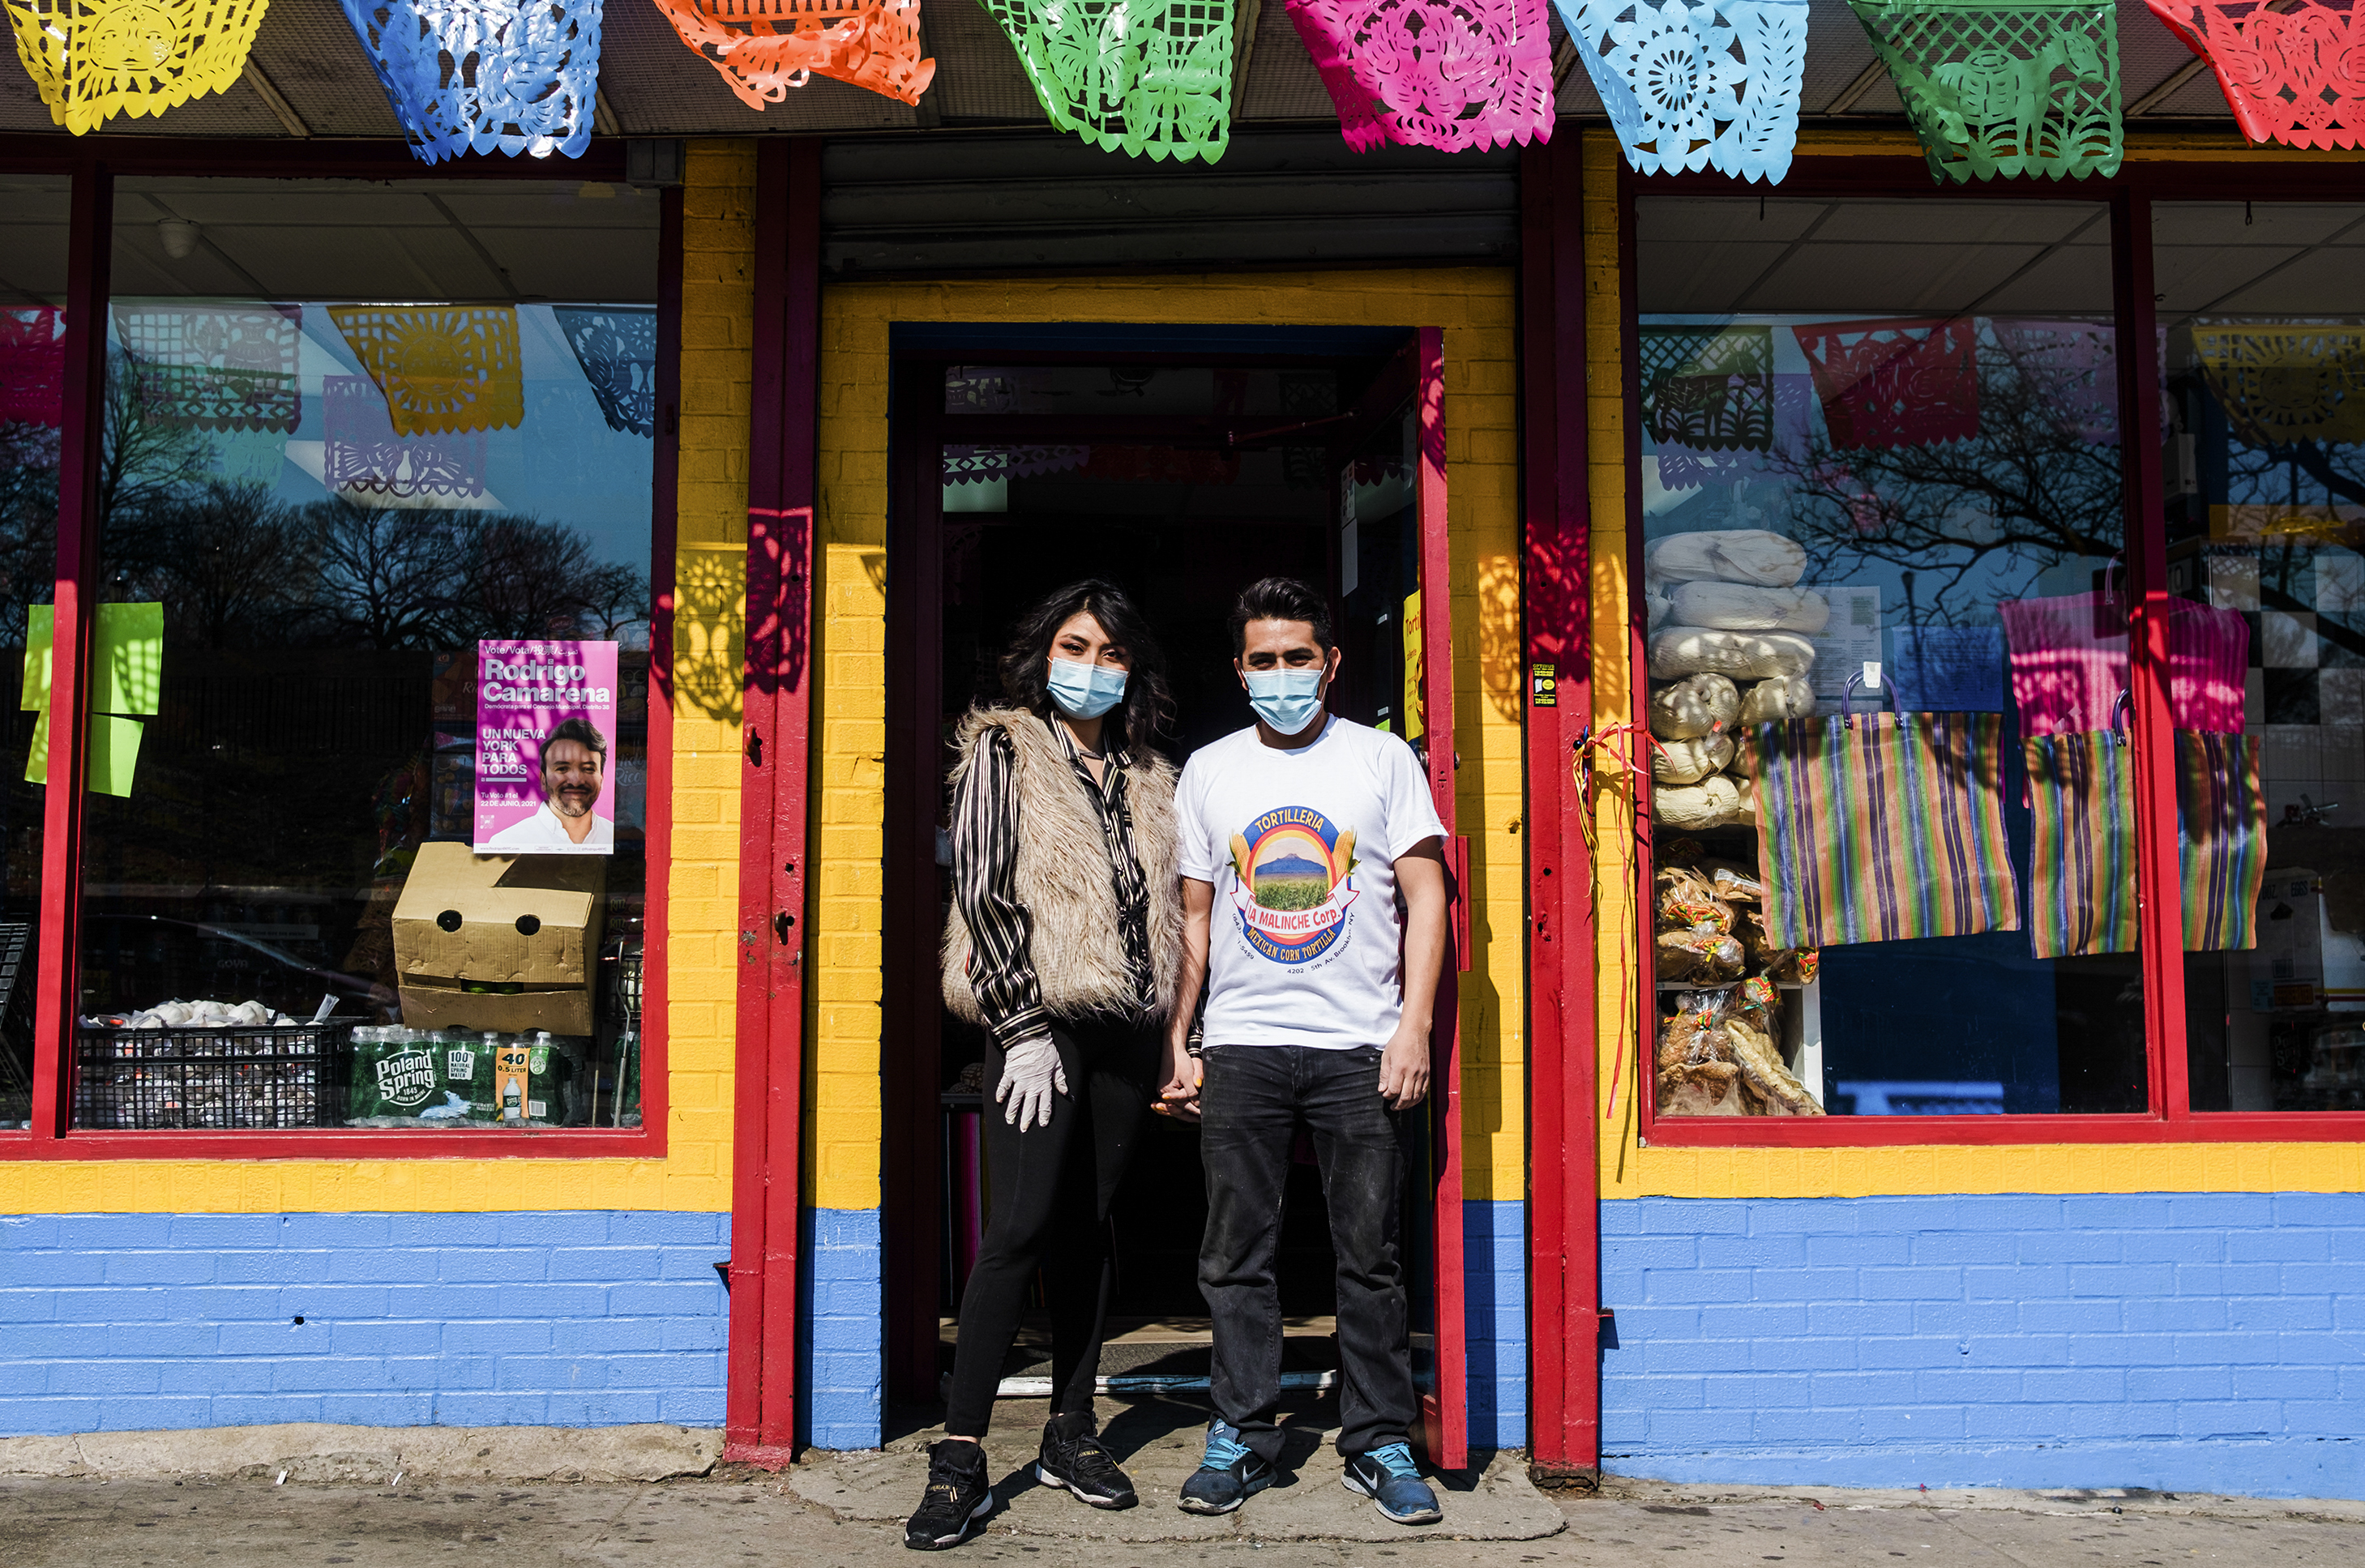 Ilsel Garcia and Jesus Delgada secured the storefront for their Tortilleria La Malinche last summer, and opened in February.